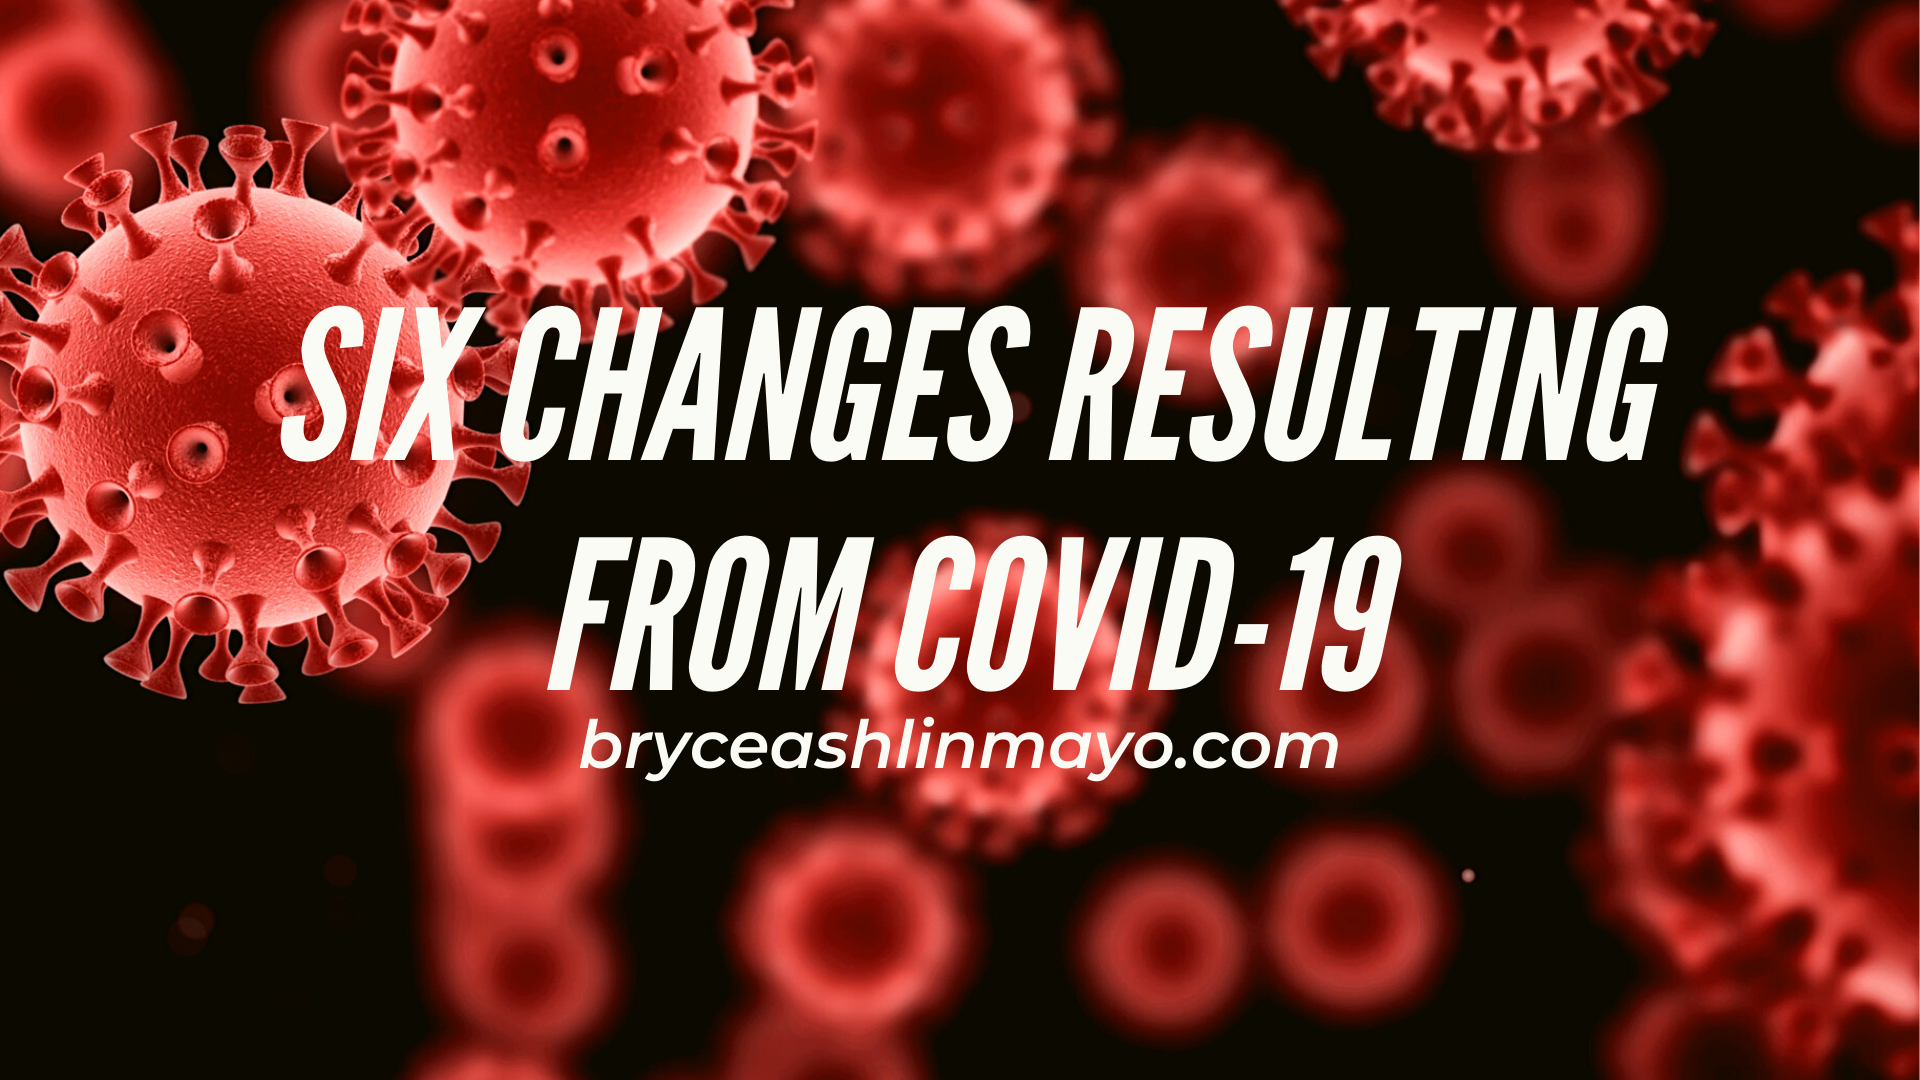 Six Changes Resulting from COVID-19